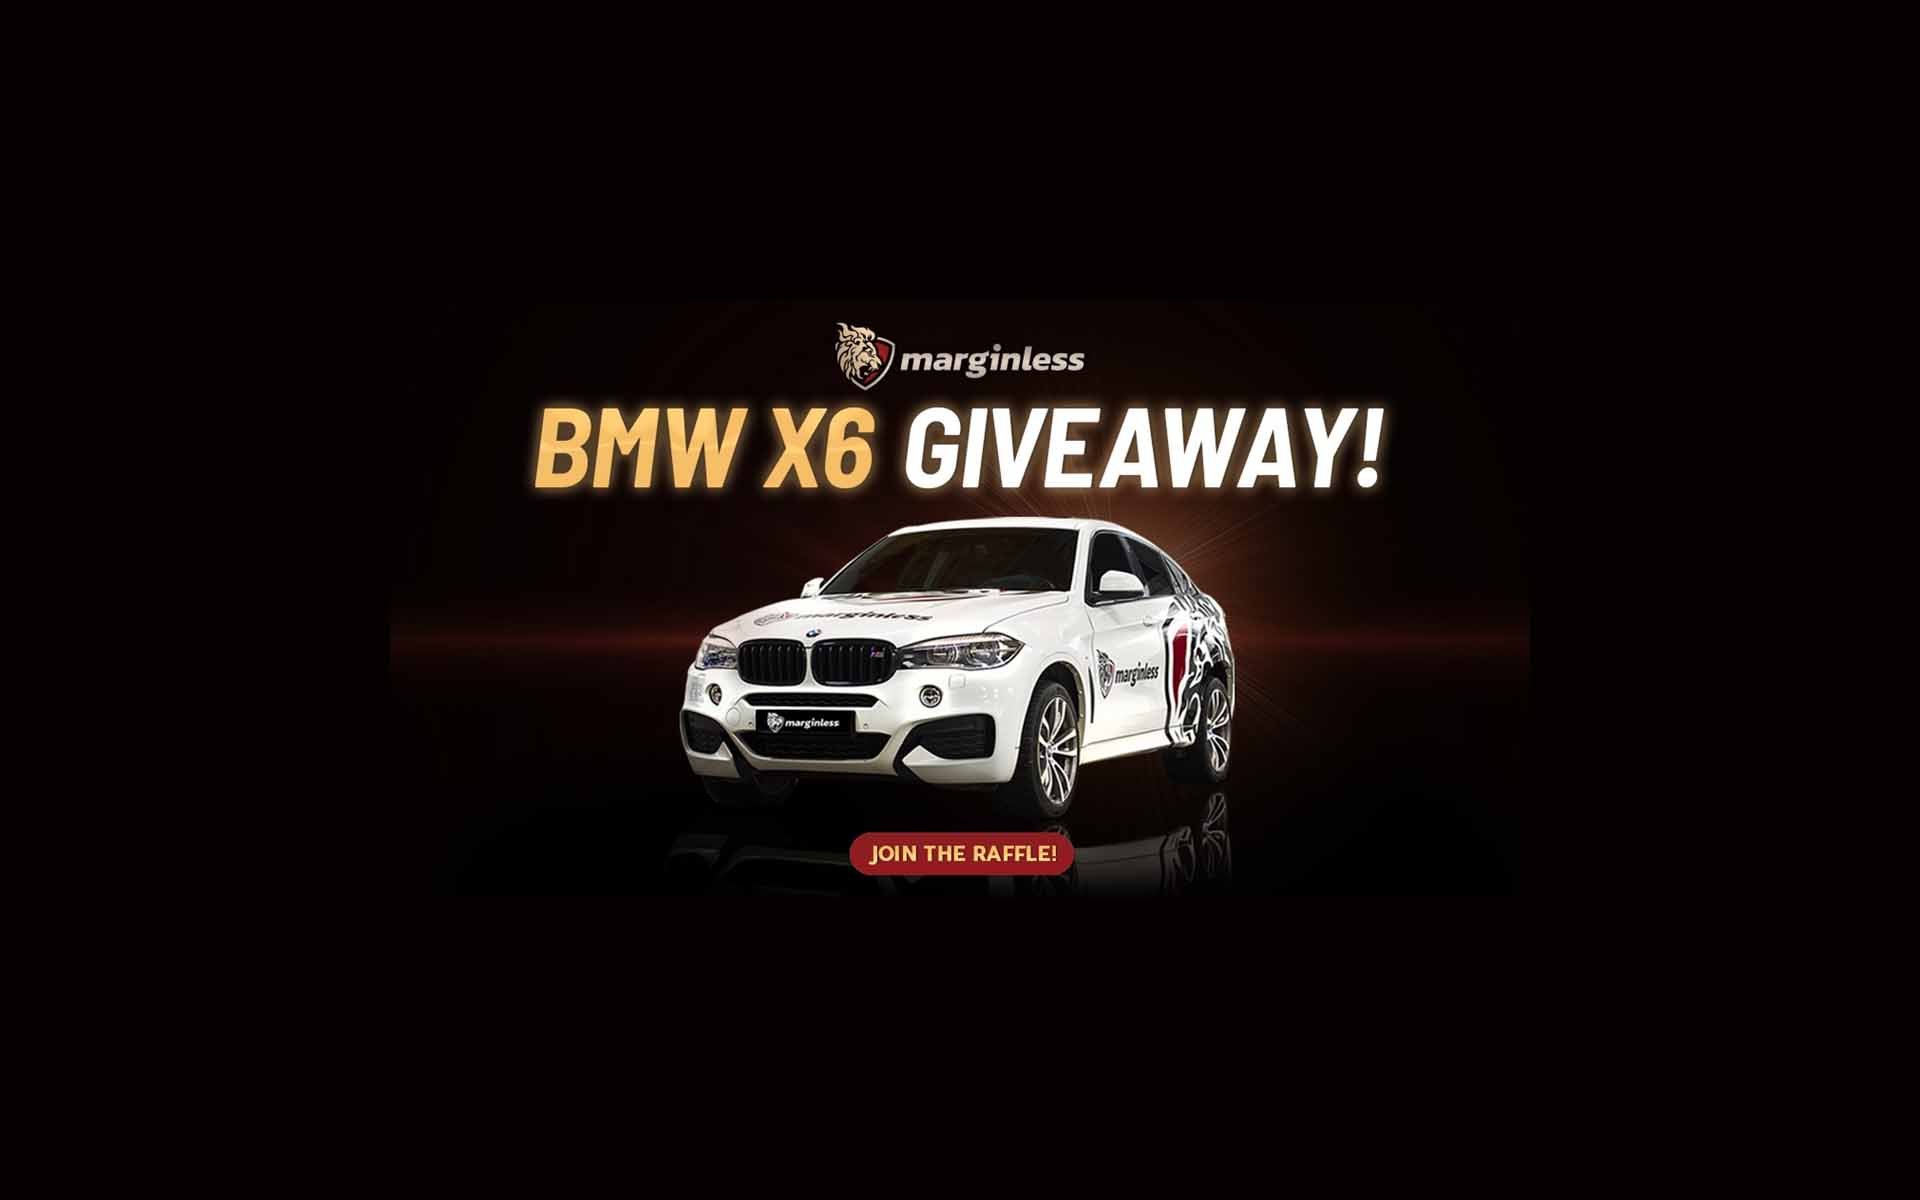 Betting ICO is Hosting a One of a Kind Raffle - Win a BMW X6!